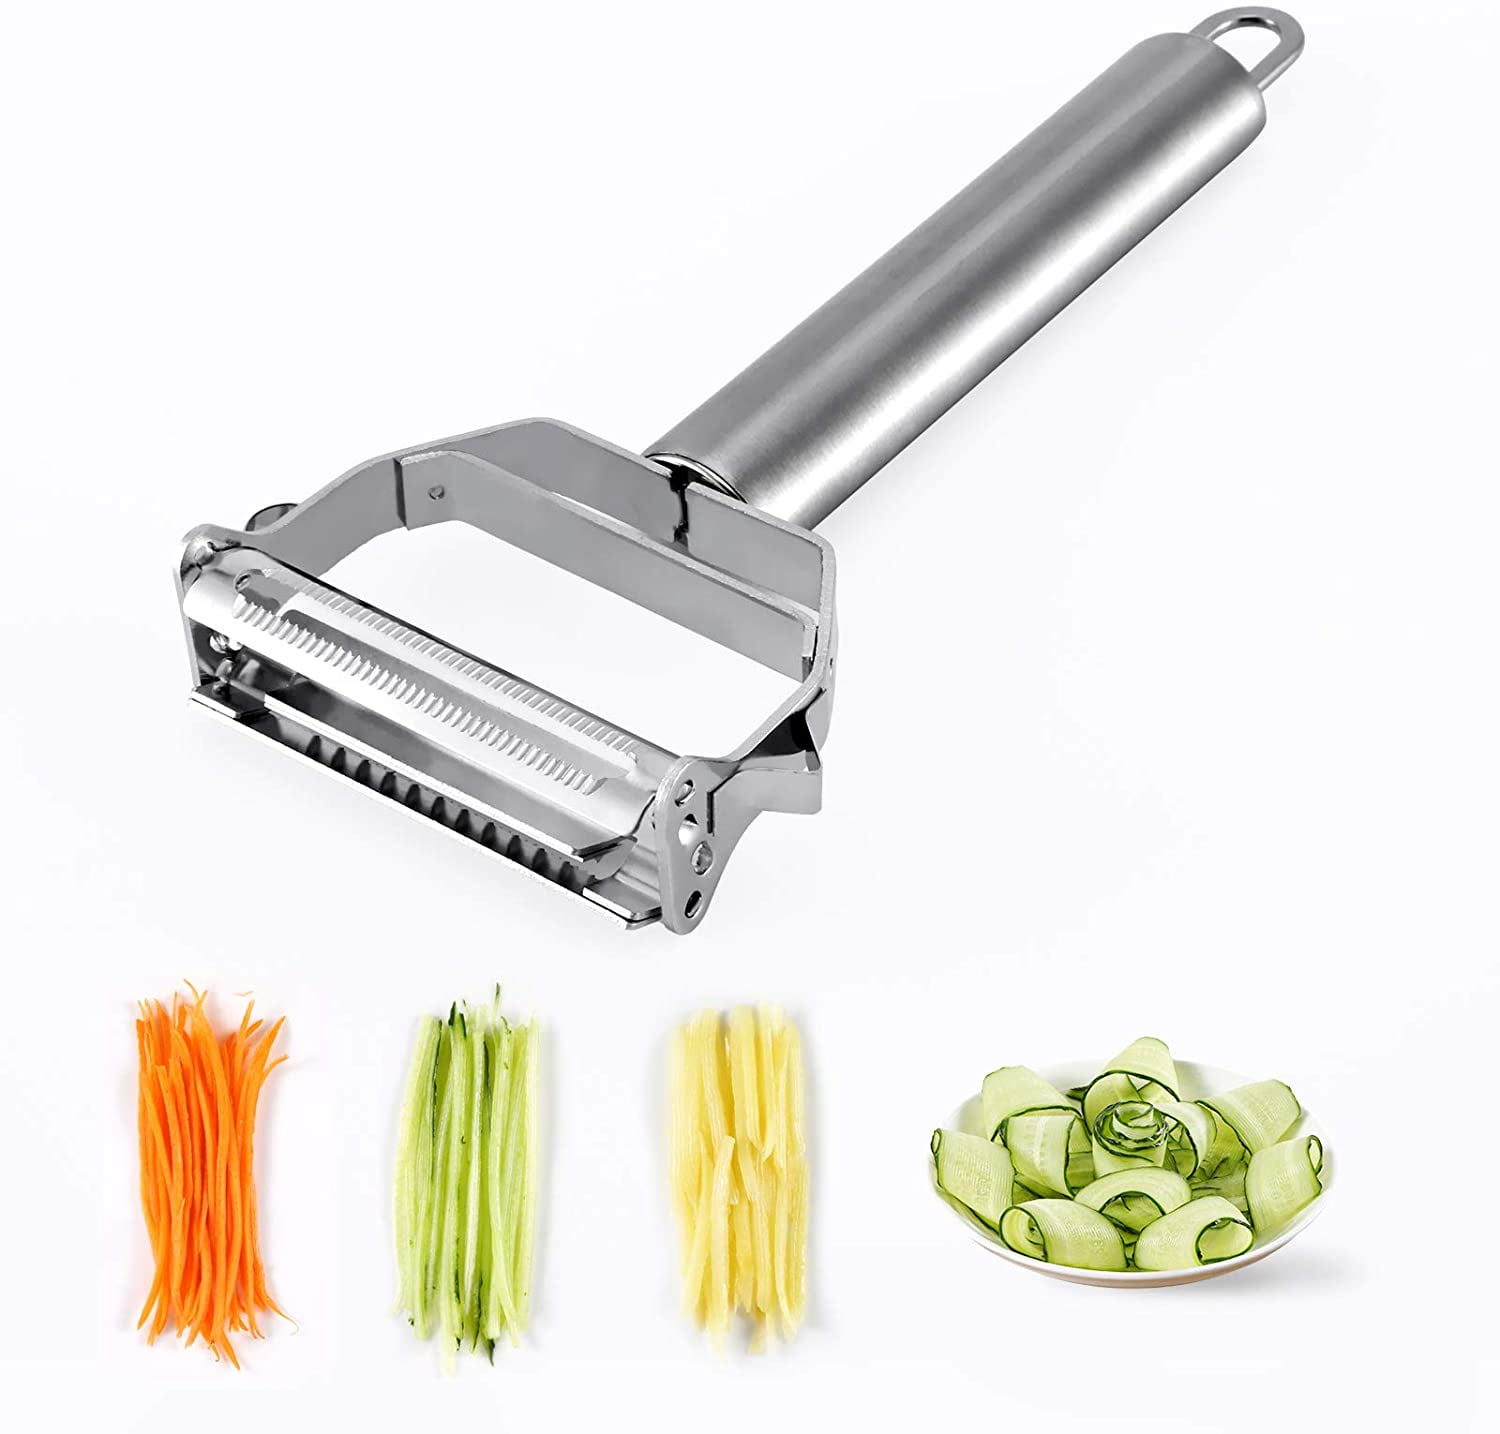 2 in one Stainless Multi Cutter with Peeler for Vegetable and Fruits Veg Cutter